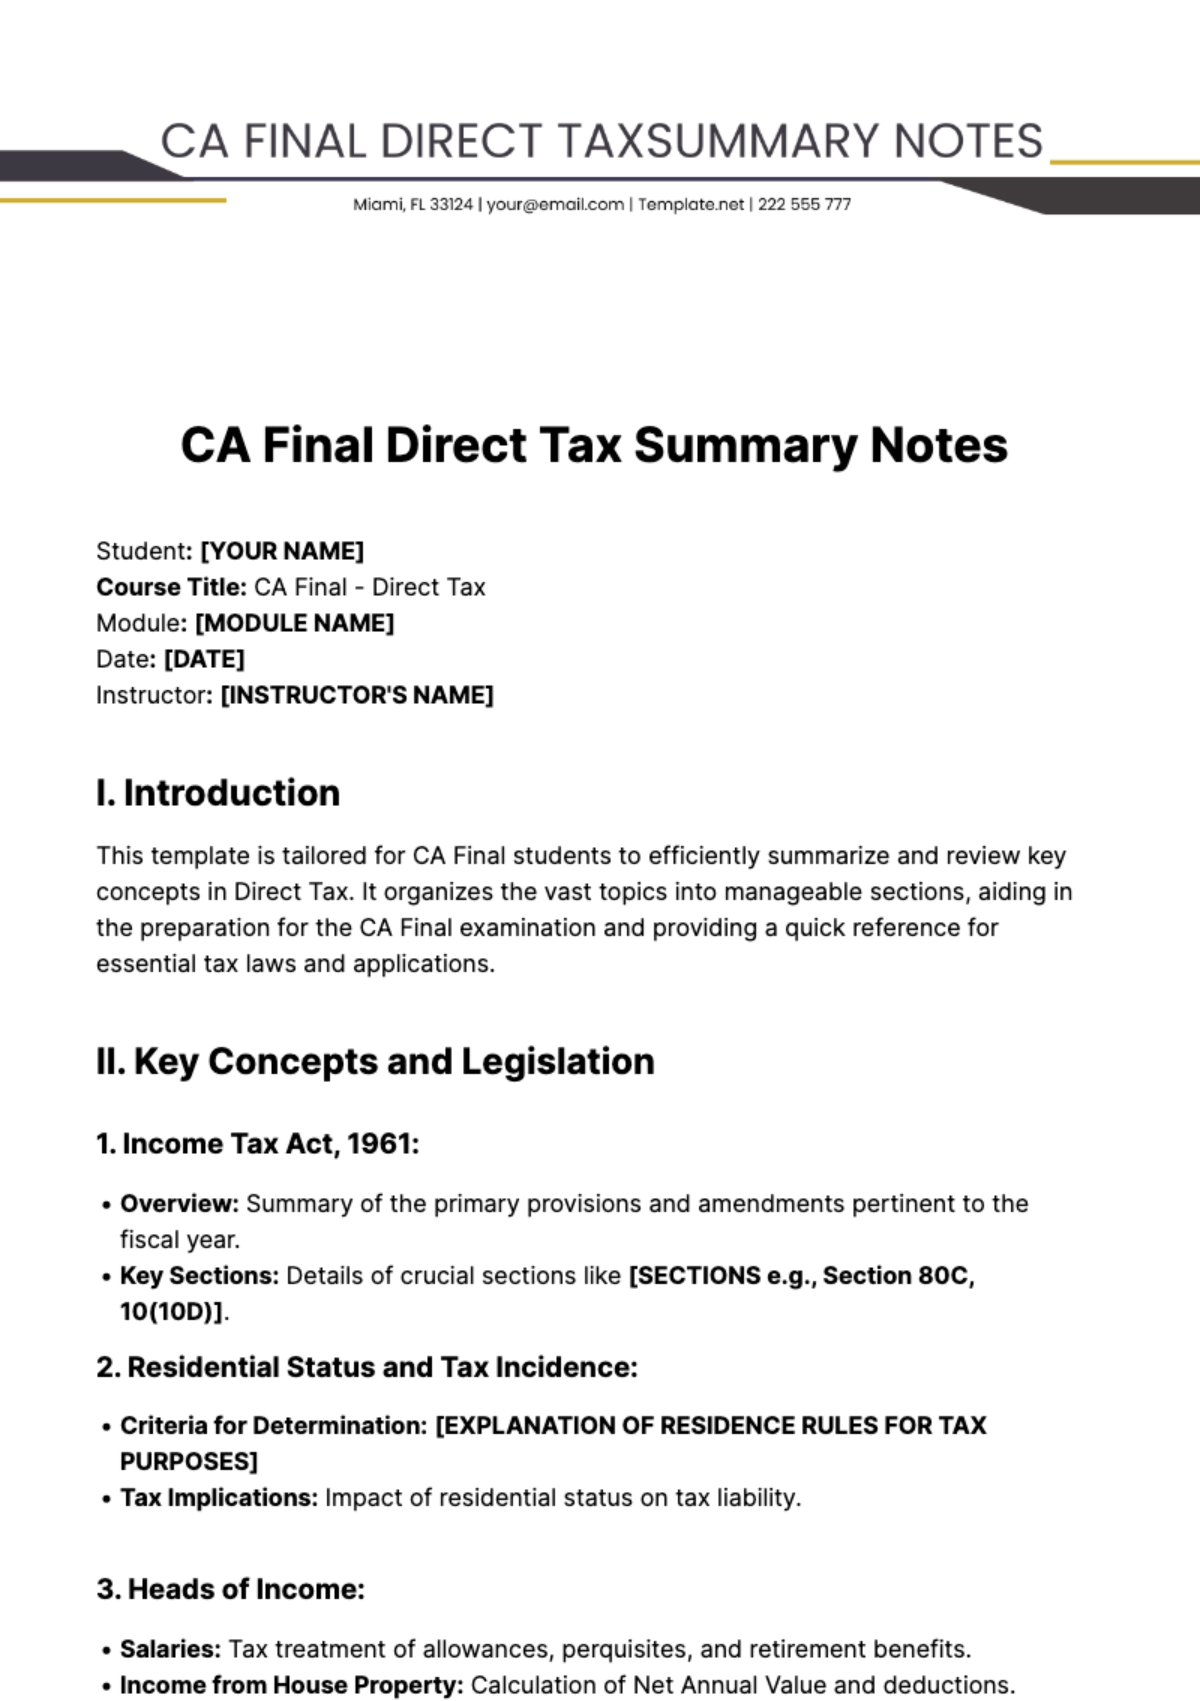 Ca Final Direct Tax Summary Notes Template